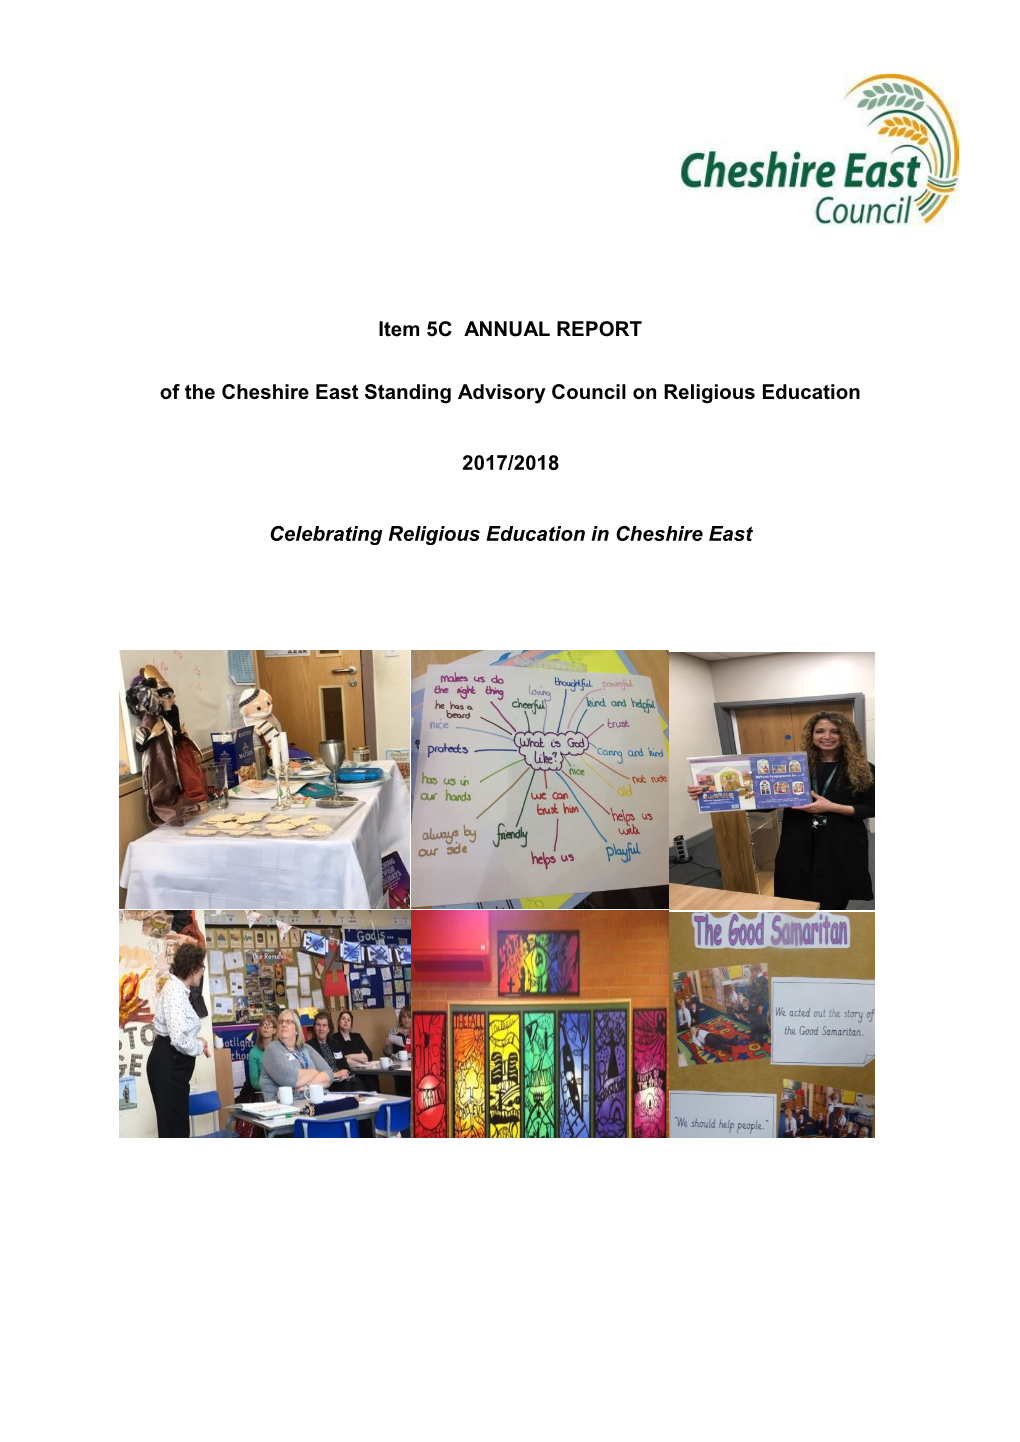 Item 5C ANNUAL REPORT of the Cheshire East Standing Advisory Council on Religious Education